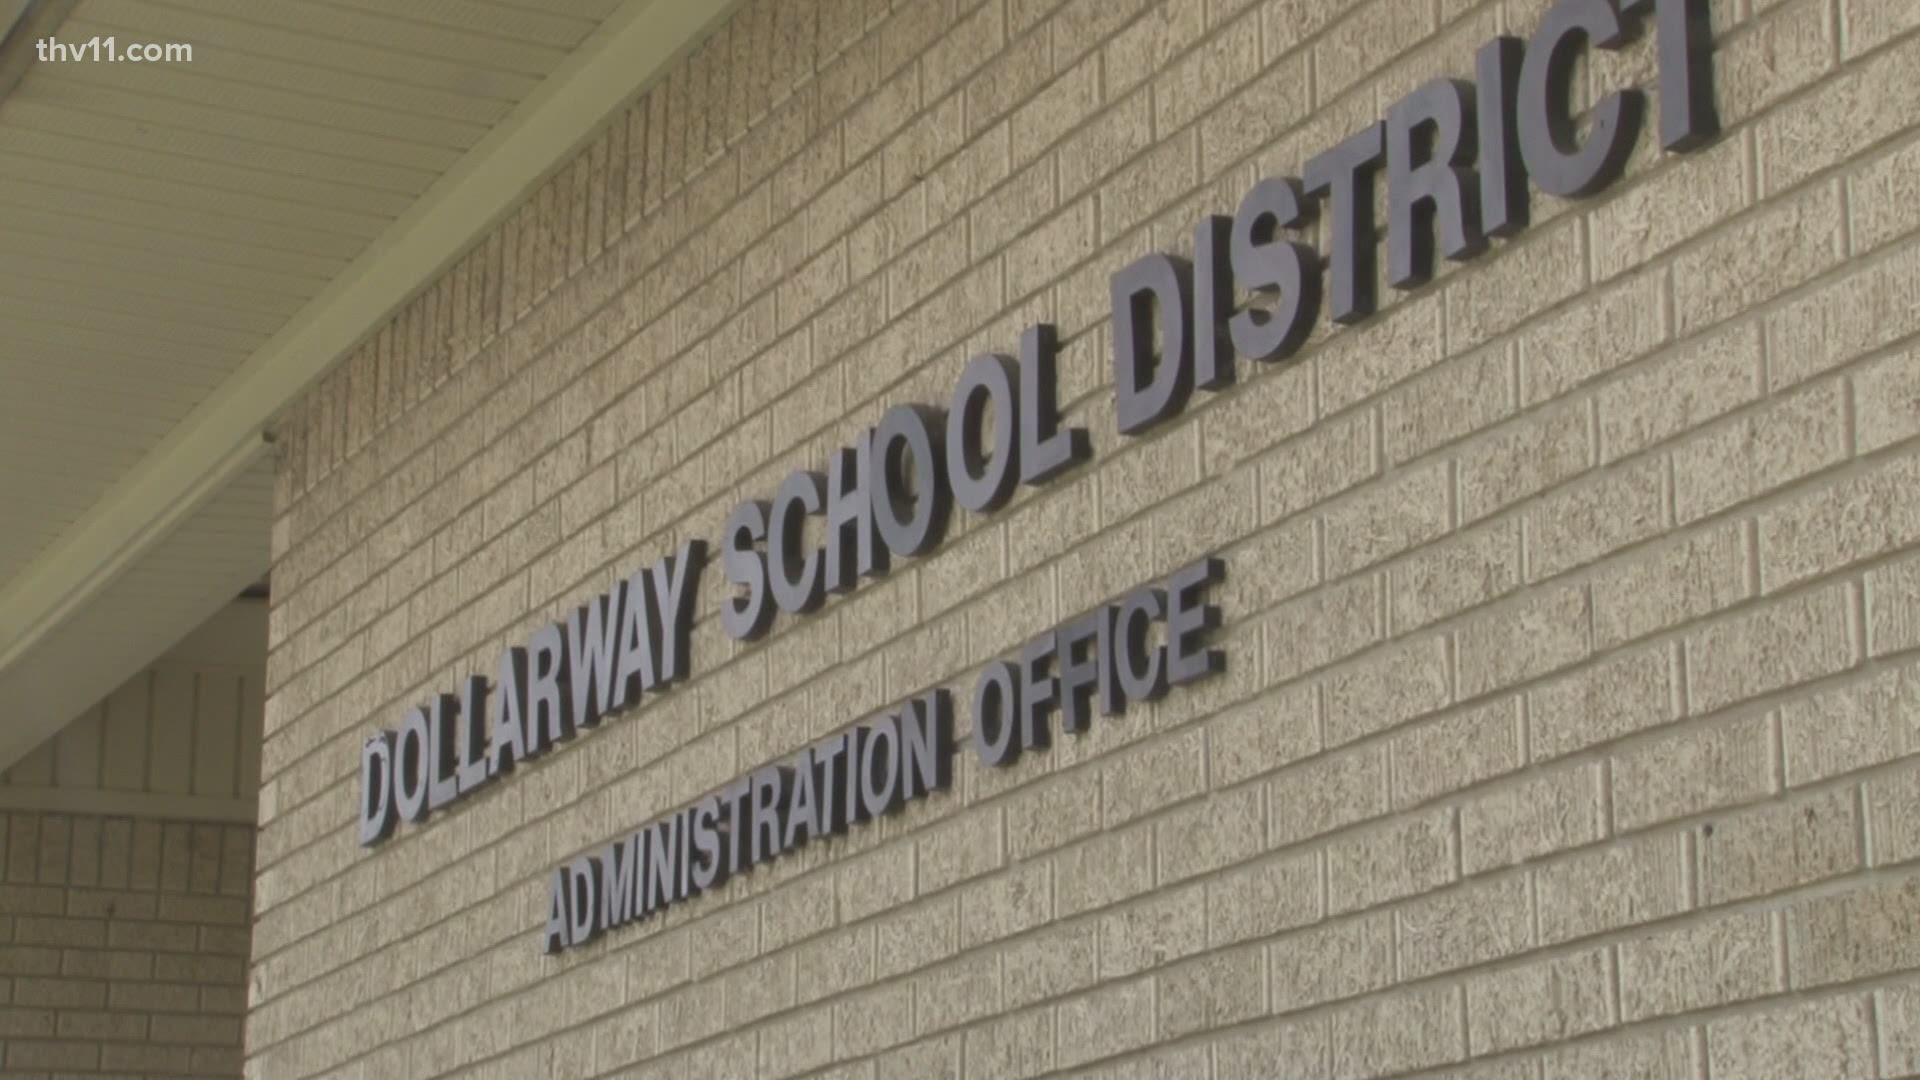 The Arkansas Department of Education approves the merger of Dollarway School District into Pine Bluff School District.